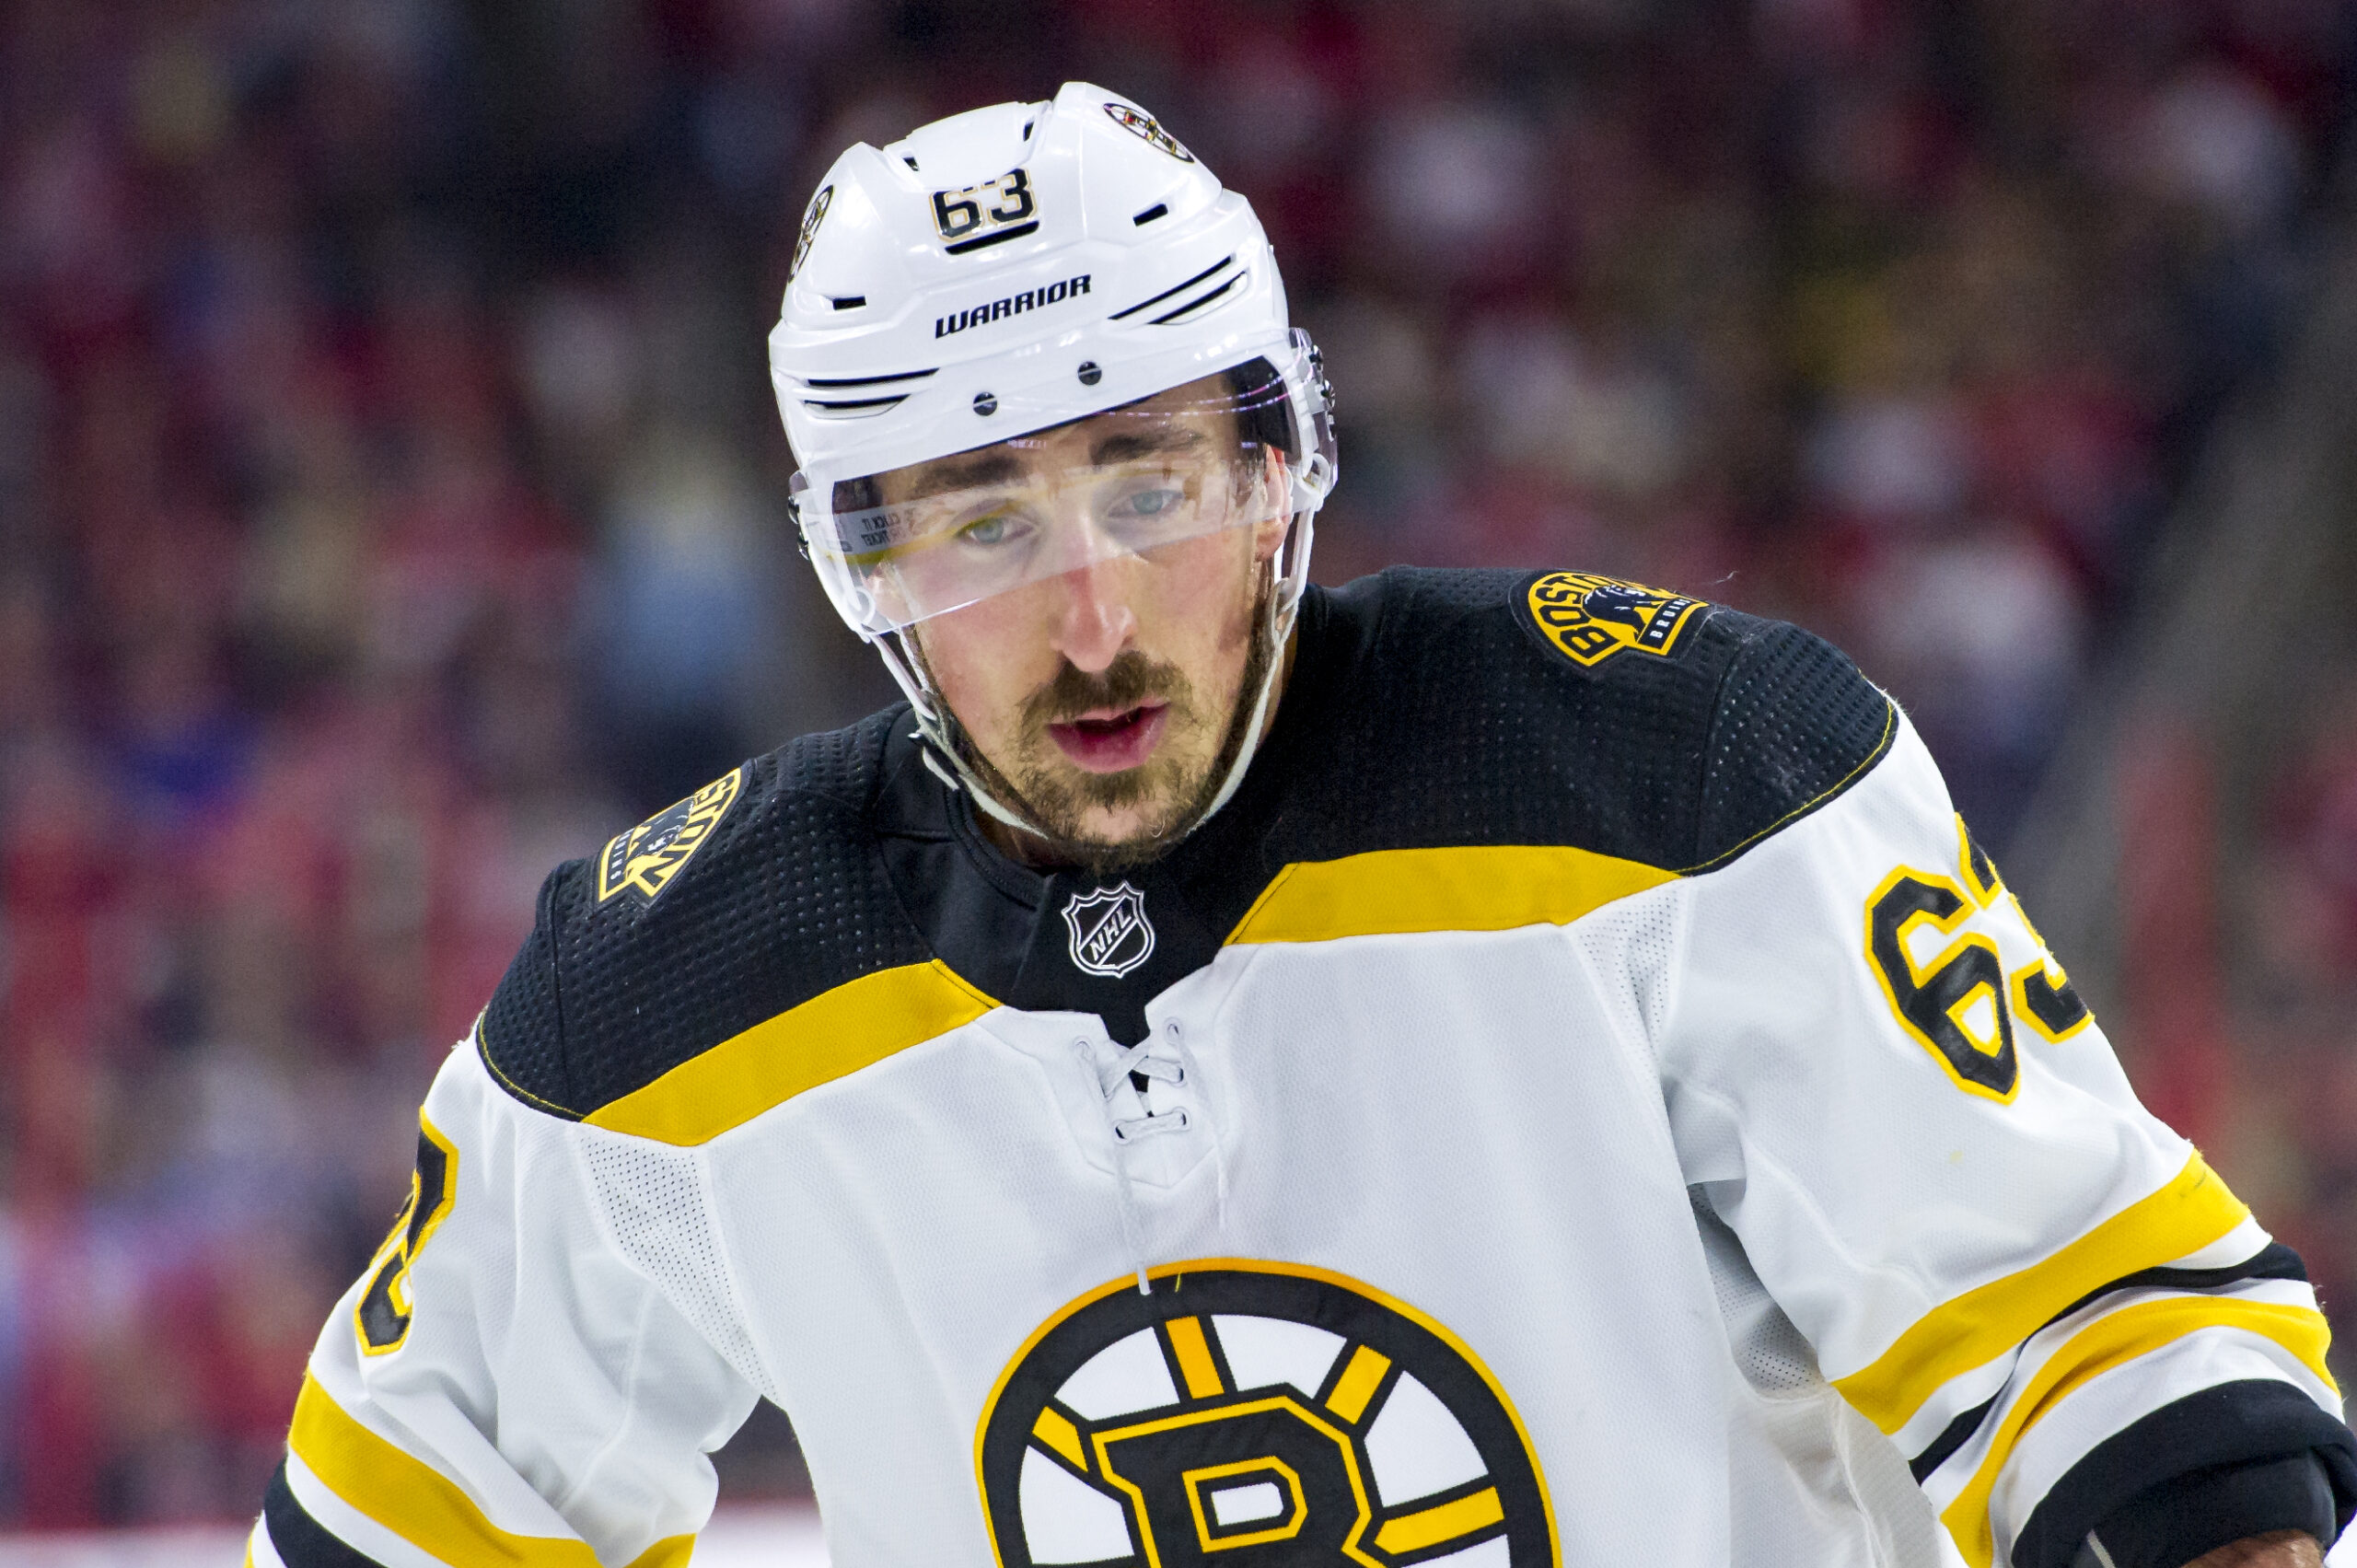 A Few Words With Brad Marchand